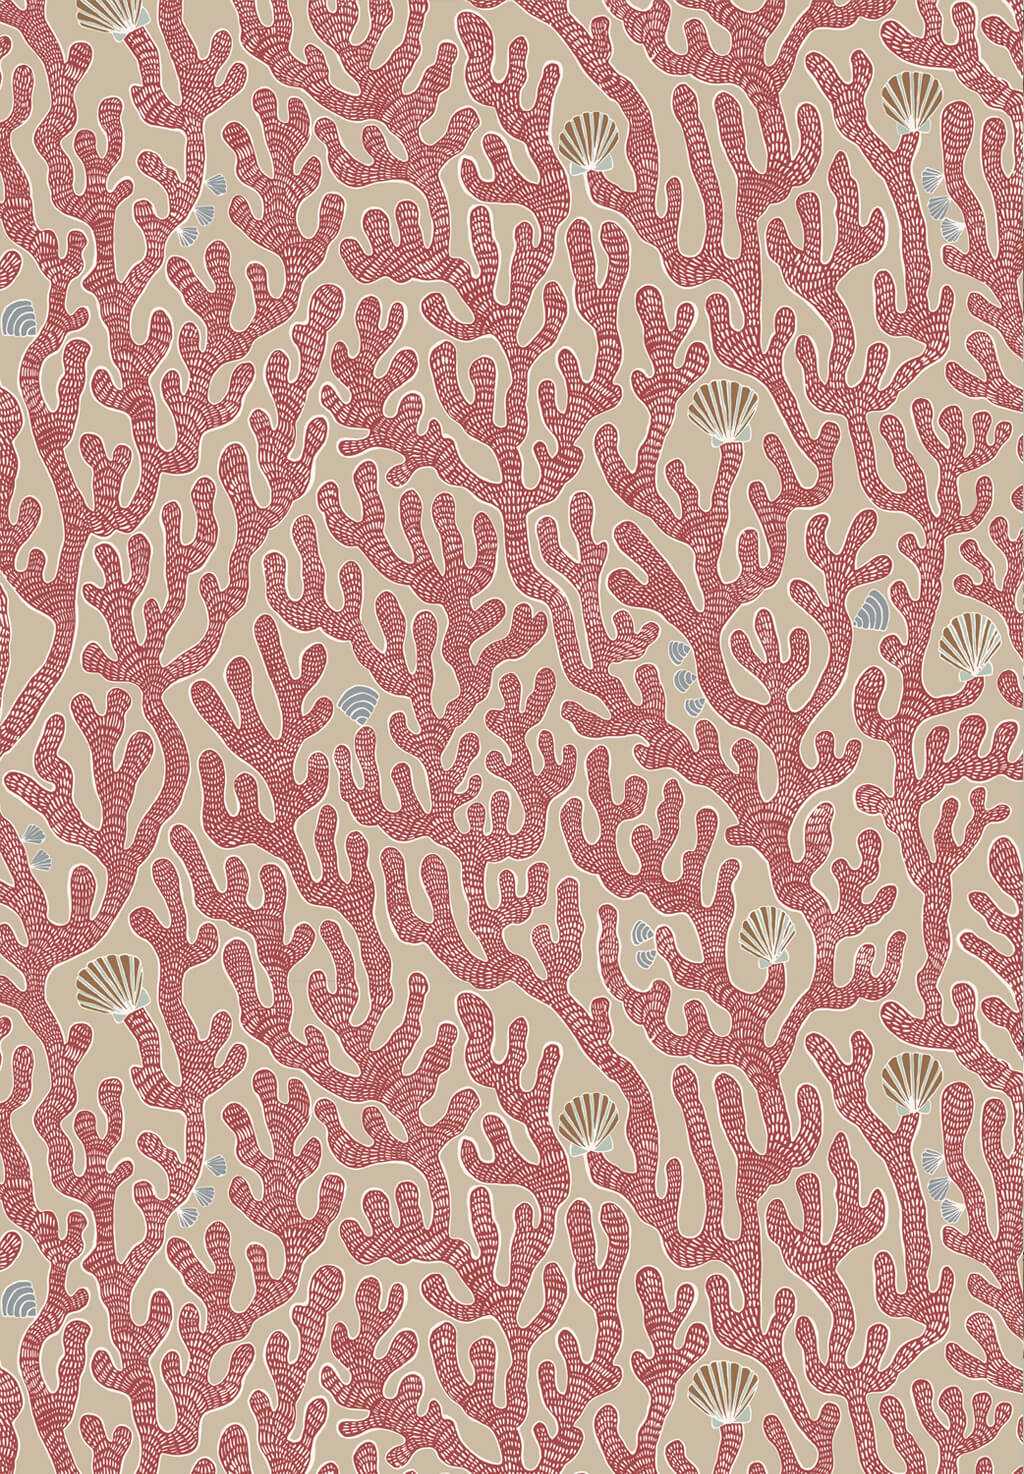 Josephine-munsey-wallpaper-coral-print-illustration-red-topping